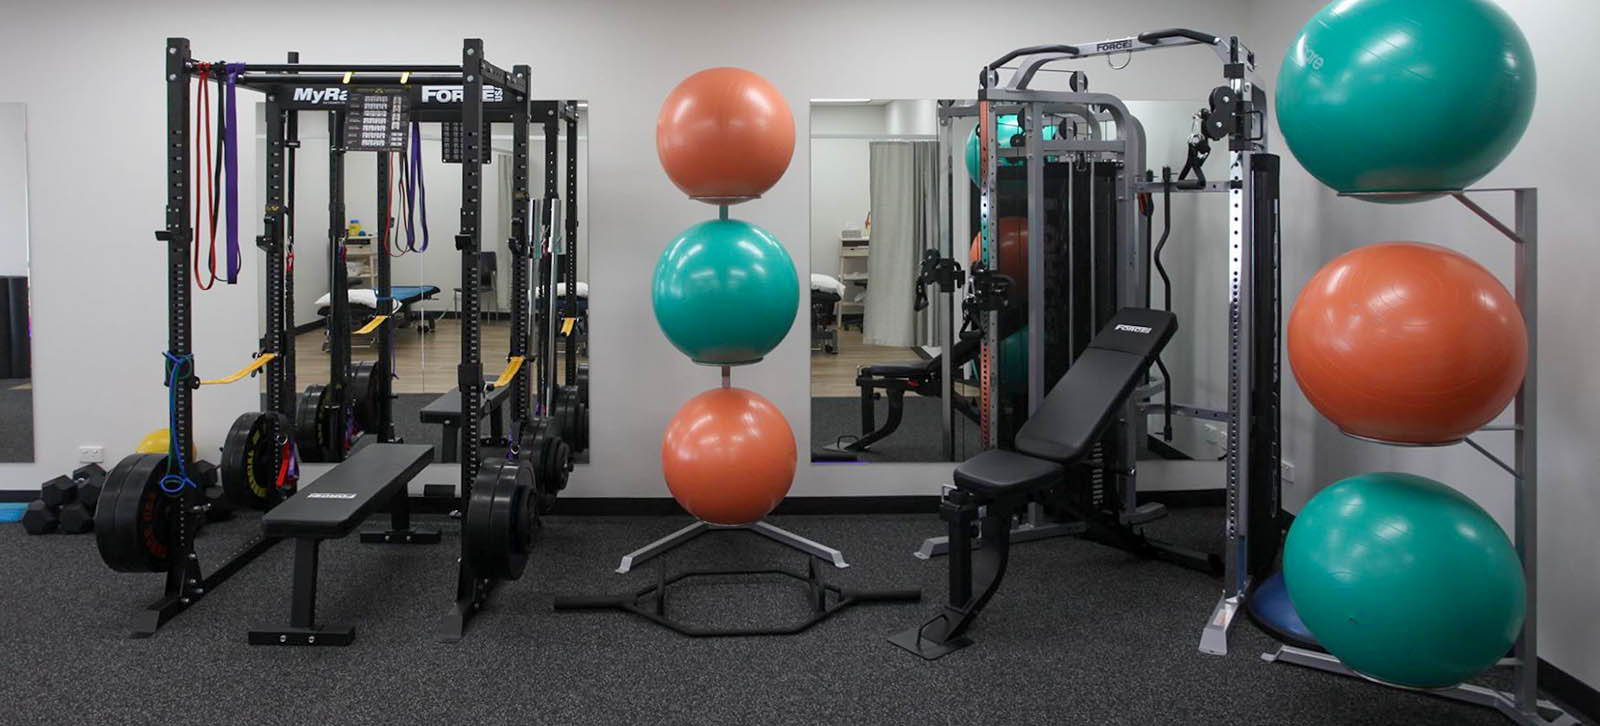 Physiotherapy Gym Fit Out - Customisable My Rack for versatile exercises and Functional Trainer for a wide range of physiotherapy workouts.